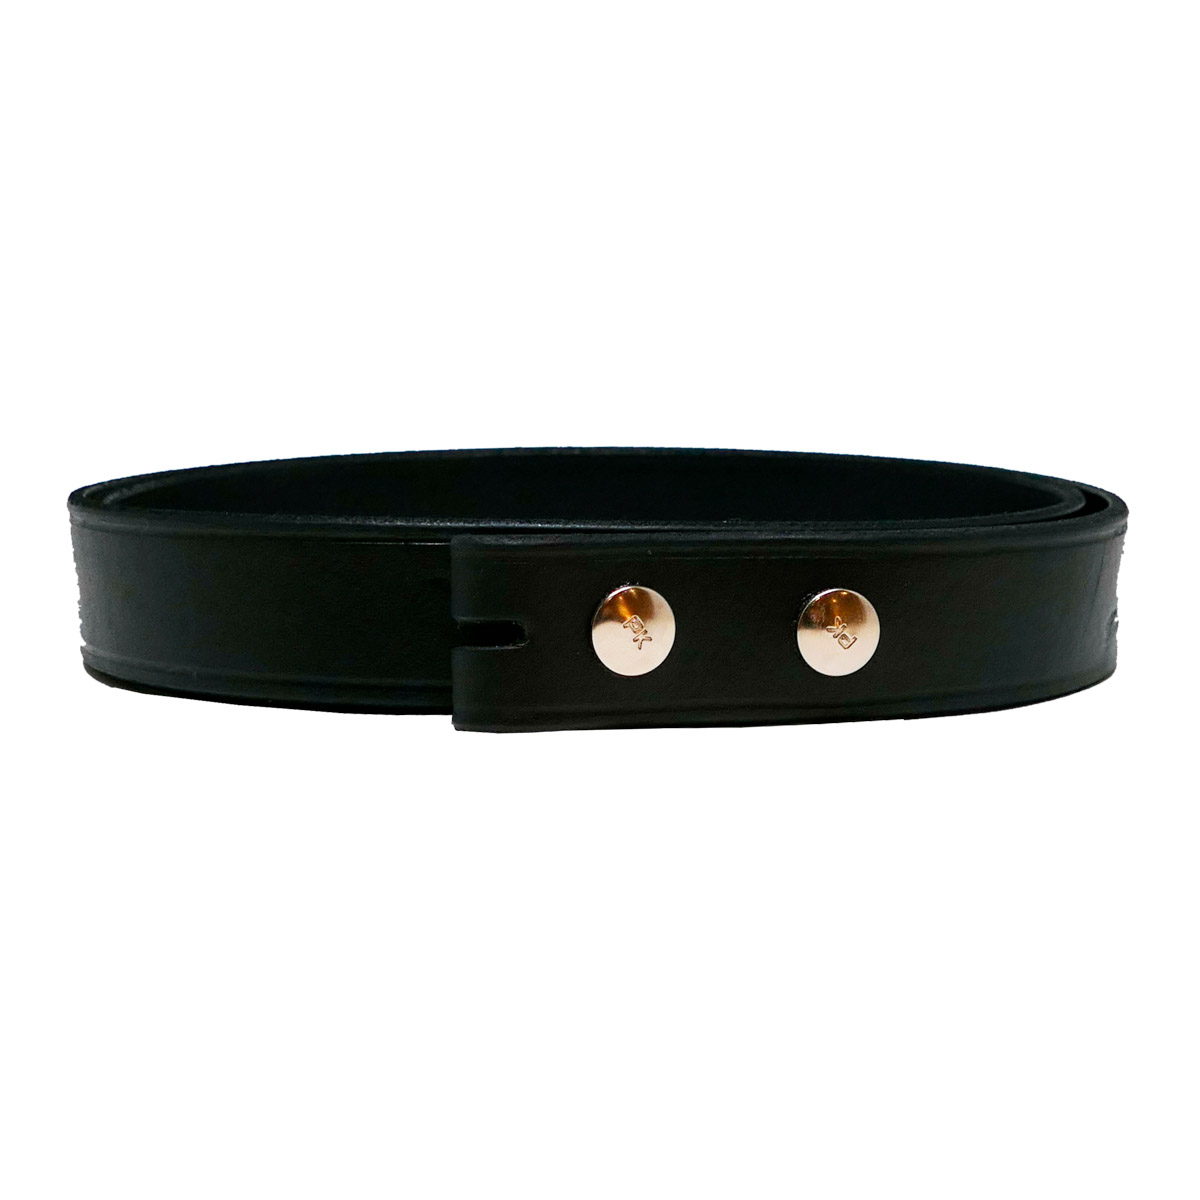 Strap for Trophy Buckle, Black Leather with Nickle Plated Press Studs 1